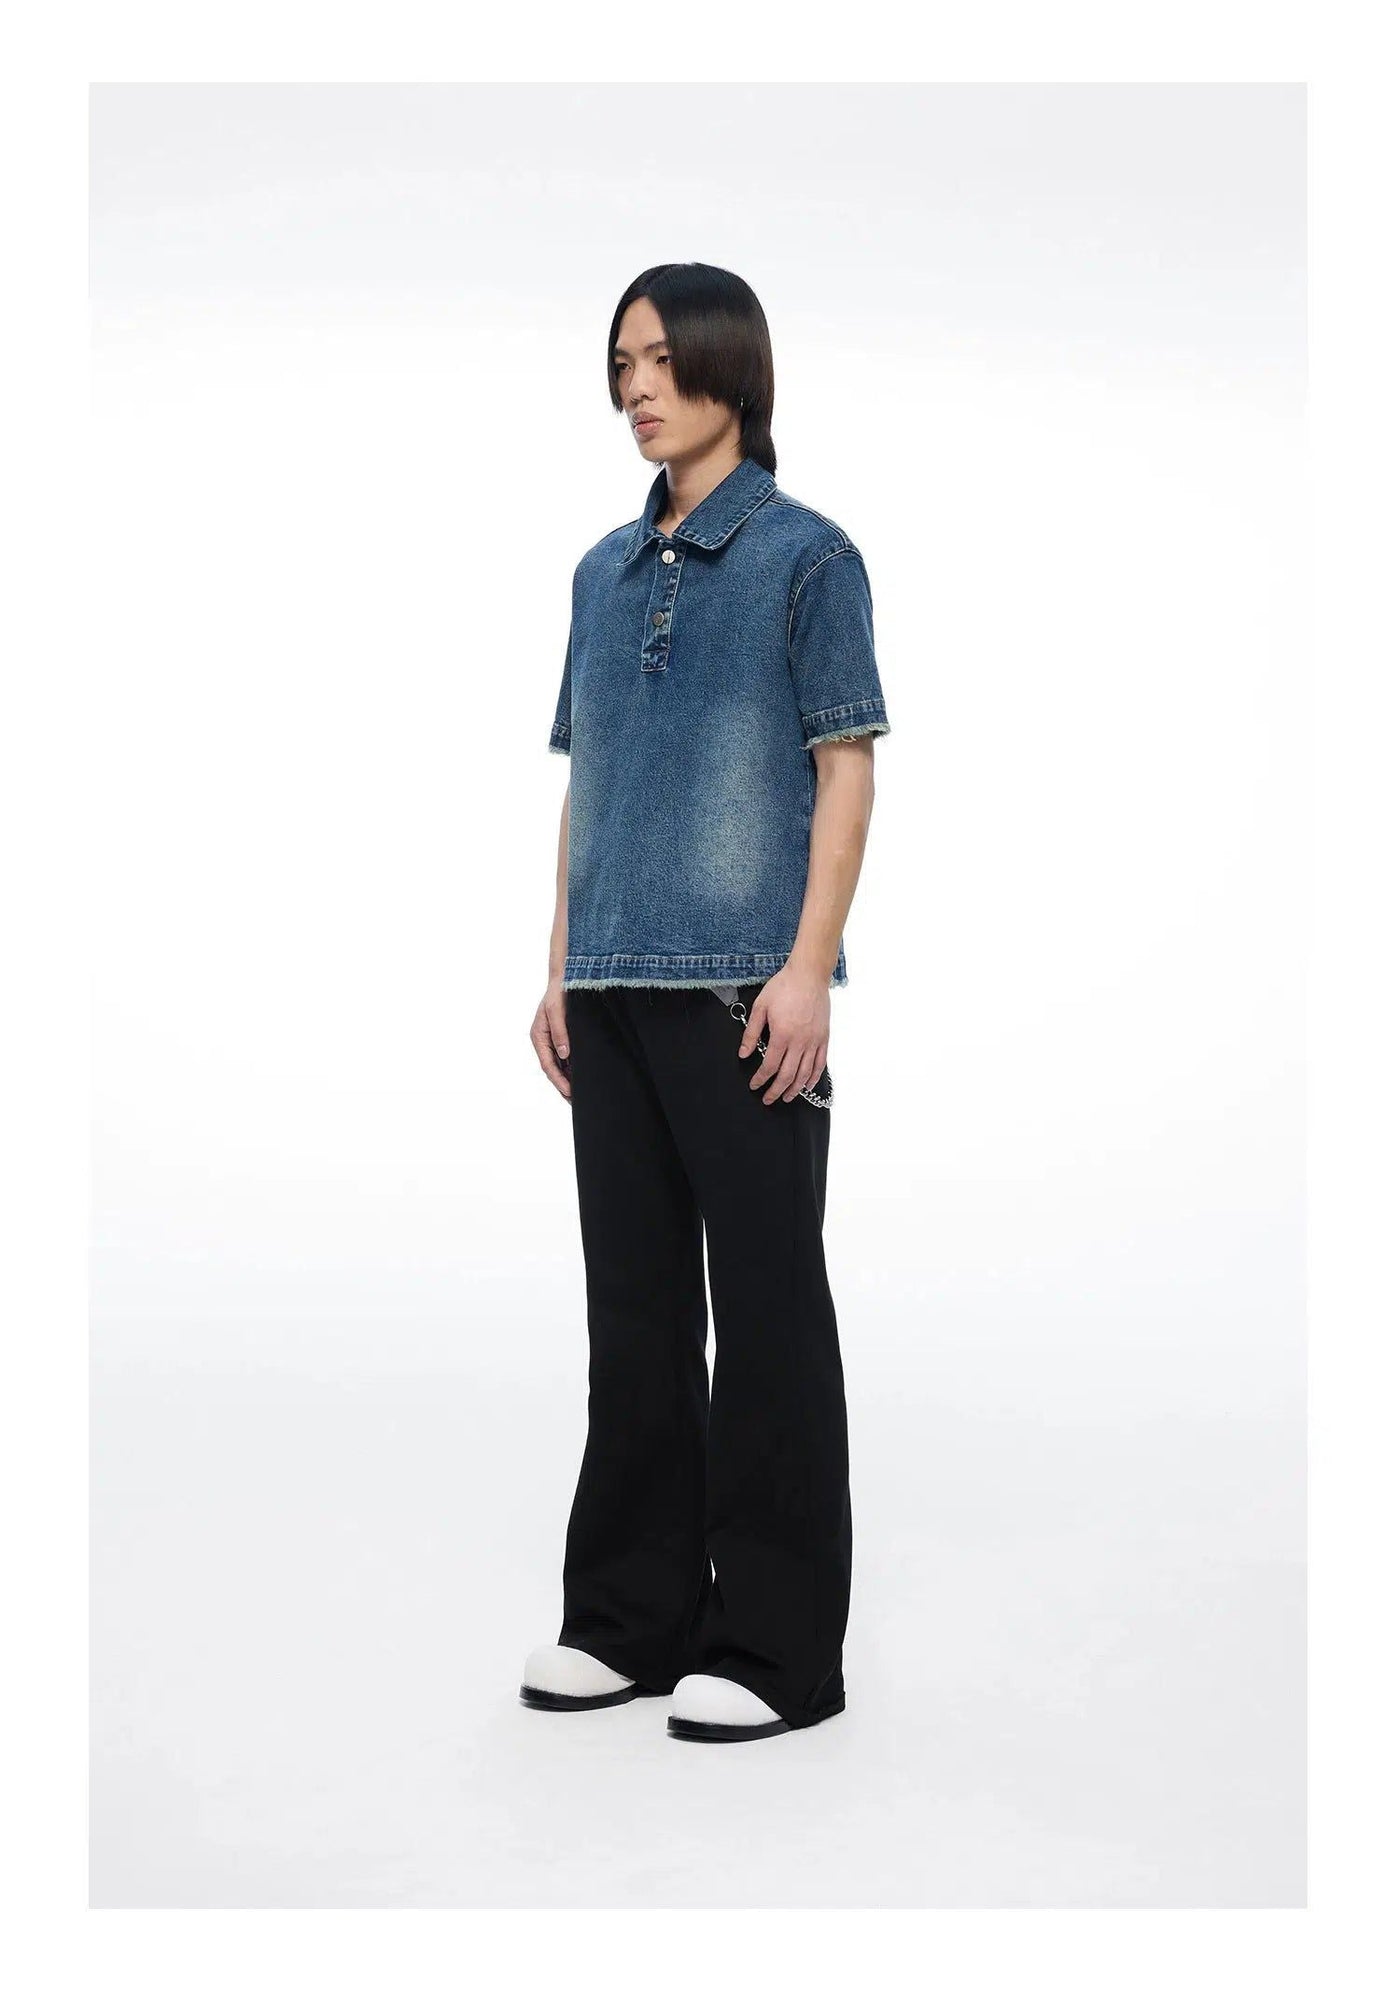 Washed Buttoned Denim Polo Korean Street Fashion Polo By Terra Incognita Shop Online at OH Vault